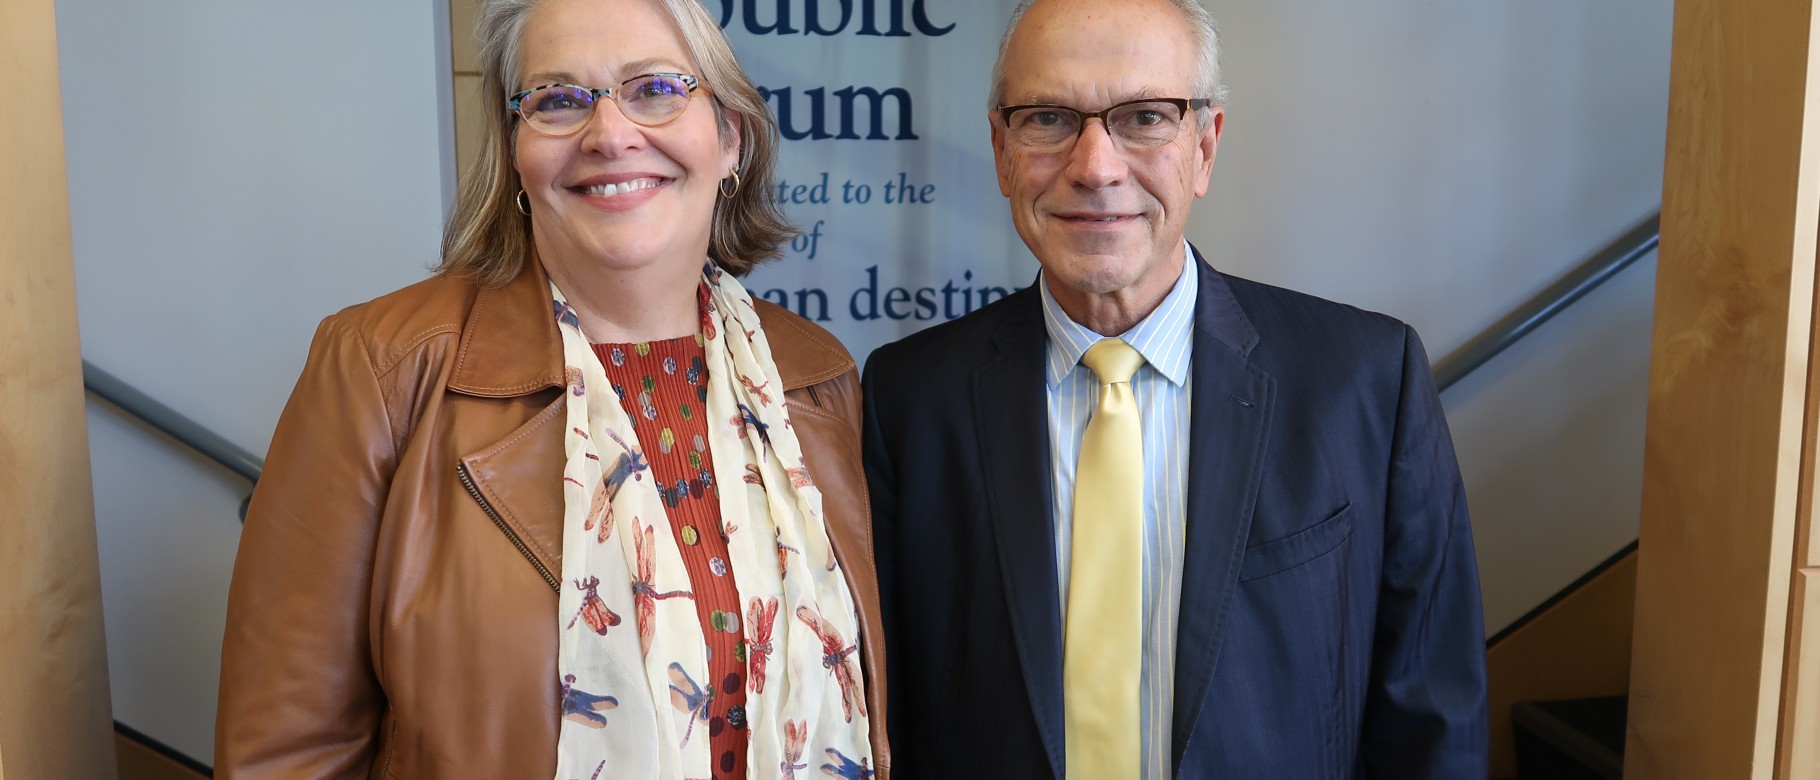 Karen Houseknecht's Office of Research and Scholarship invited Gordon Smith to UNE